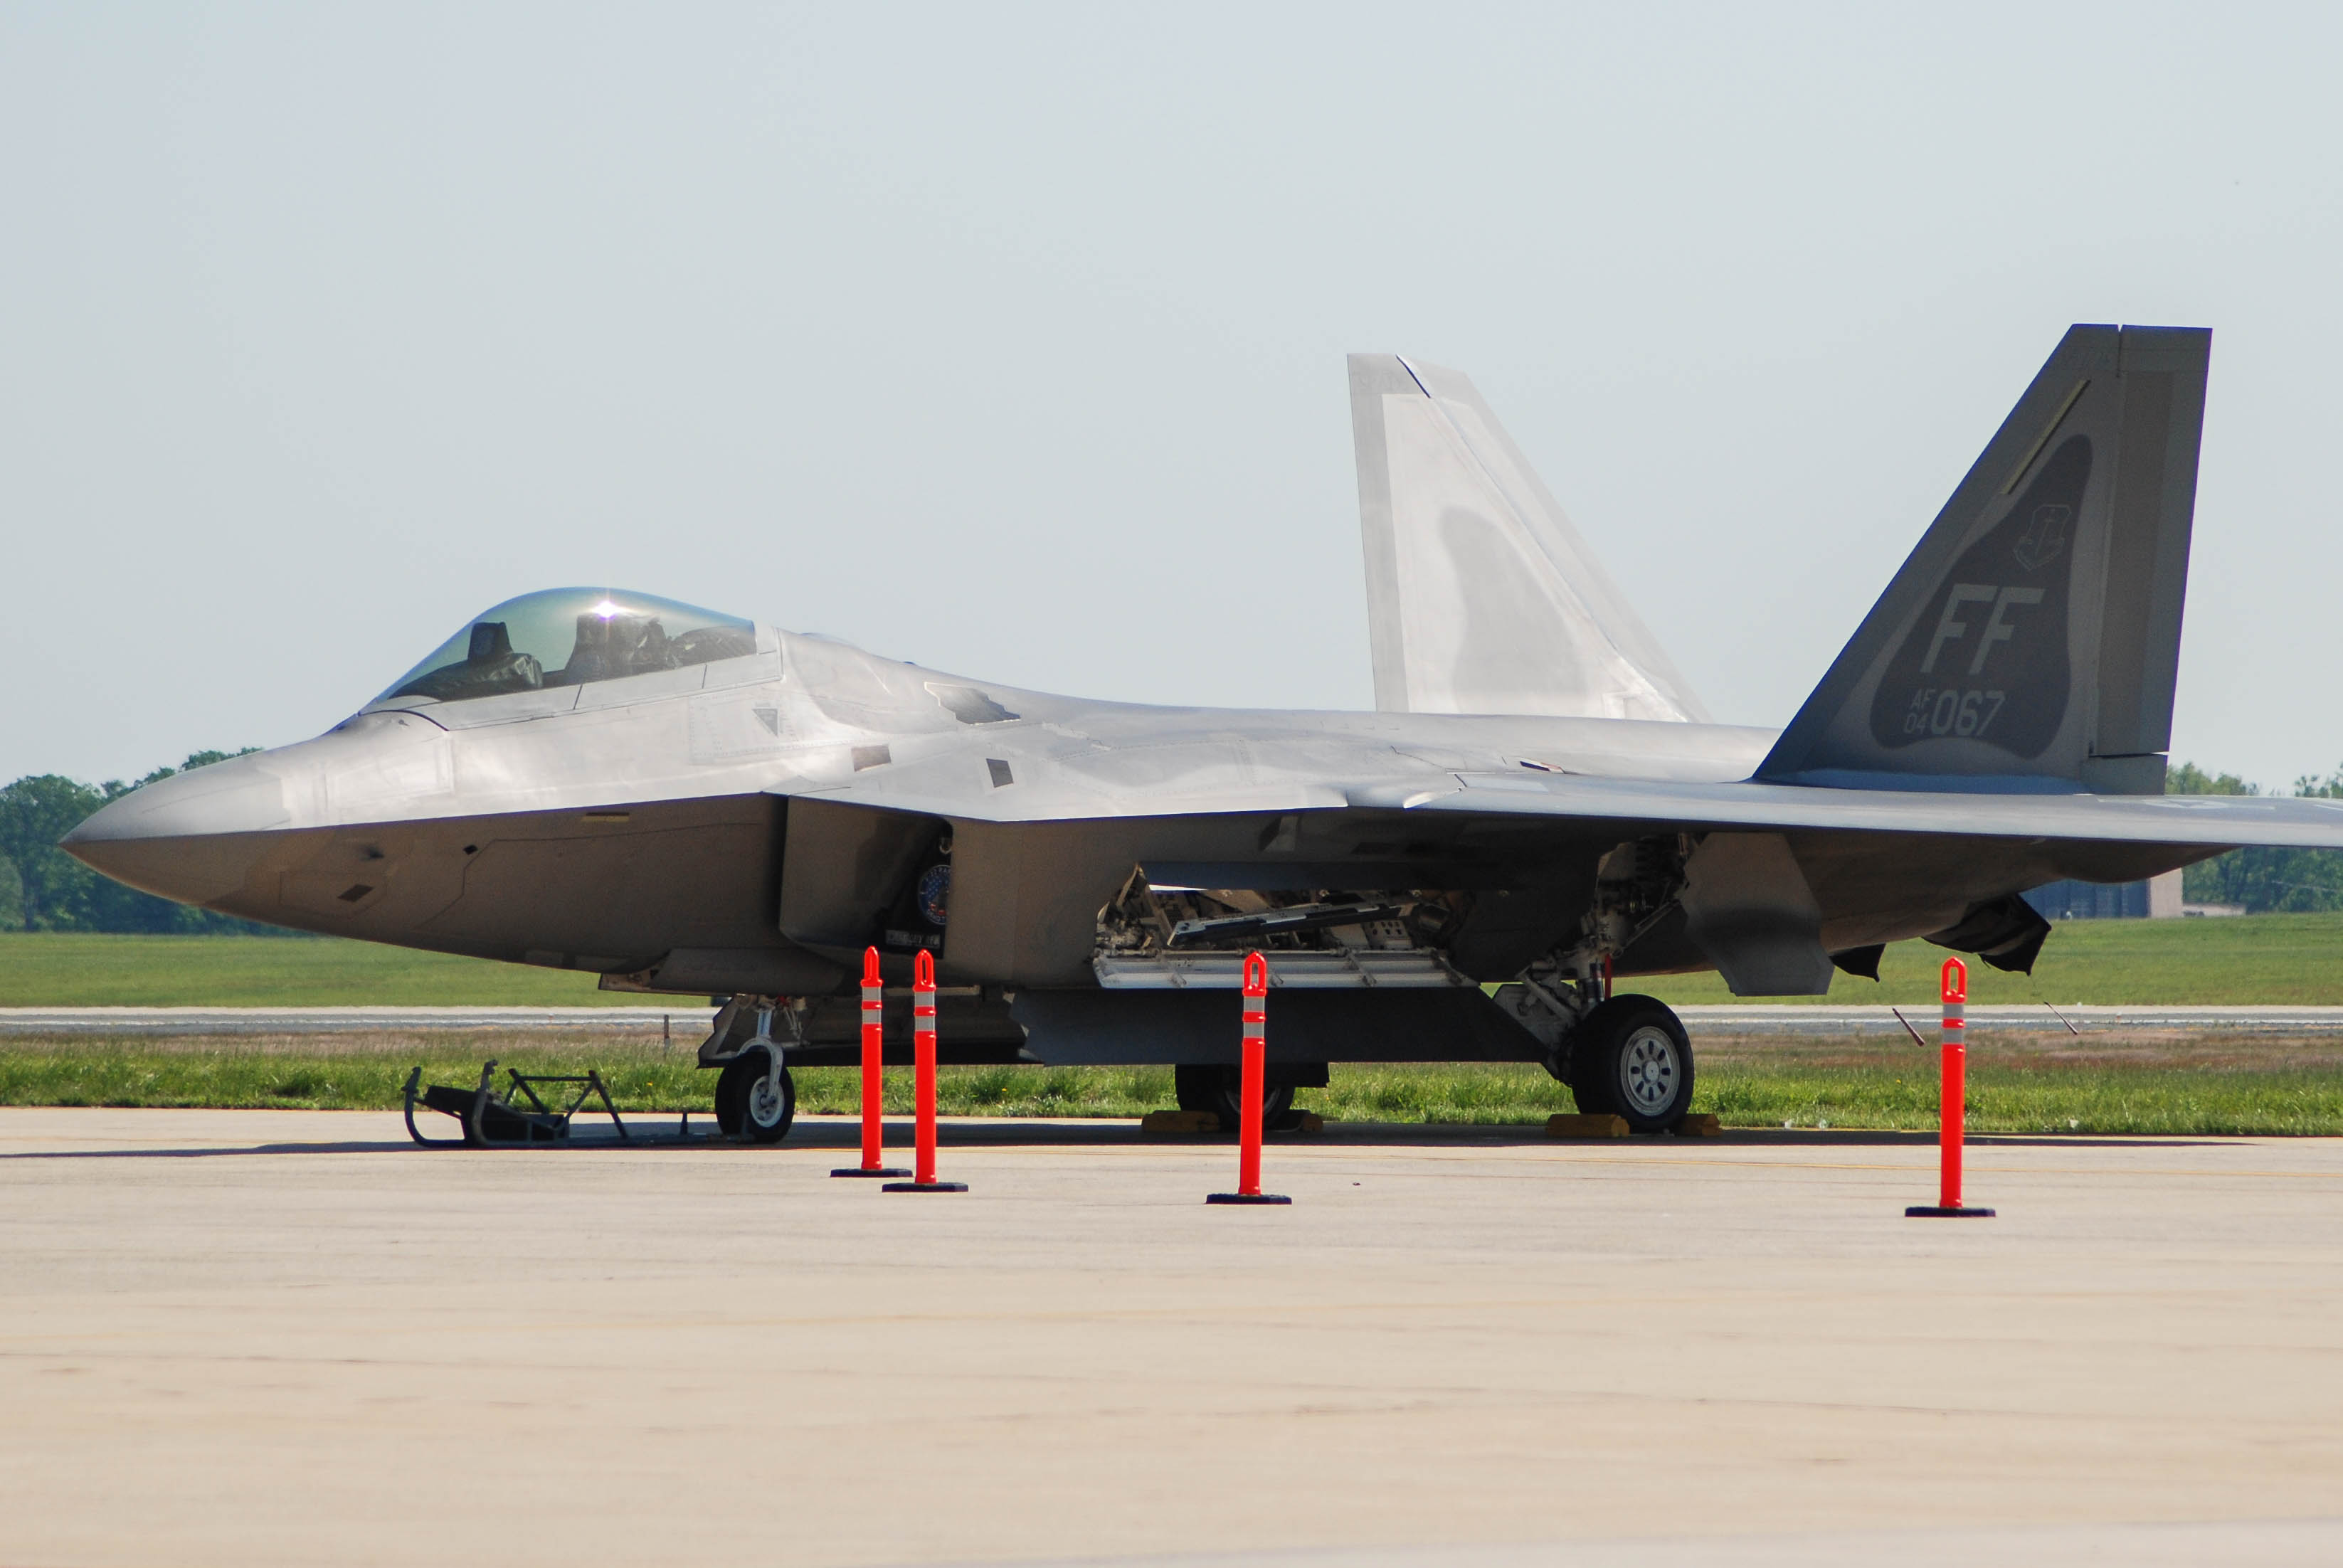 04-4067/044067 USAF - United States Air Force Lockheed Martin F-22A Raptor Photo by colinw - AVSpotters.com